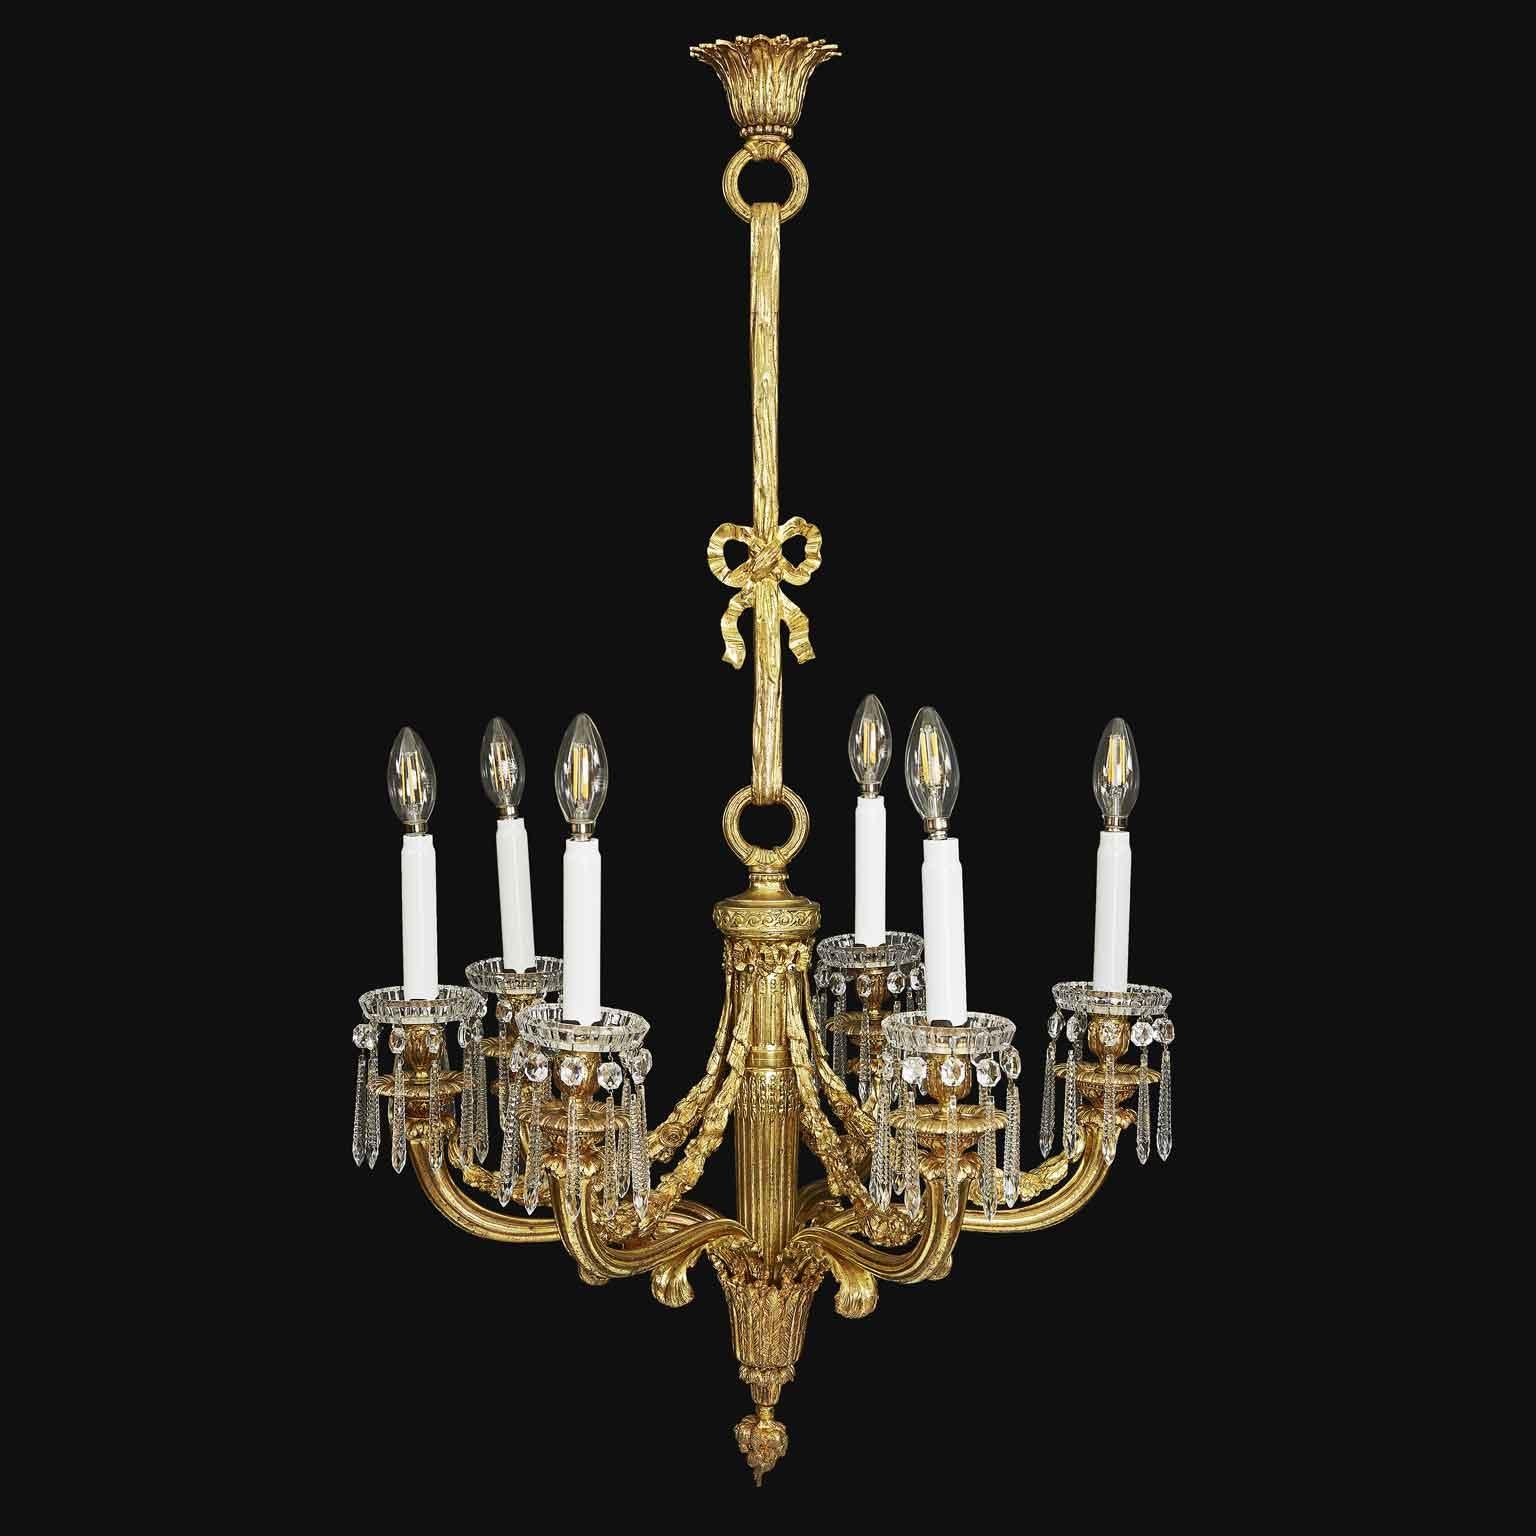 An elegant French early 20th century Empire style Baccarat crystal and ormolu chandelier. An early-20th century Baccarat Gilt Bronze Chandelier, elegant six-light French chandelier with E14 mignon mount, with a baluster stem decorated with a bow and